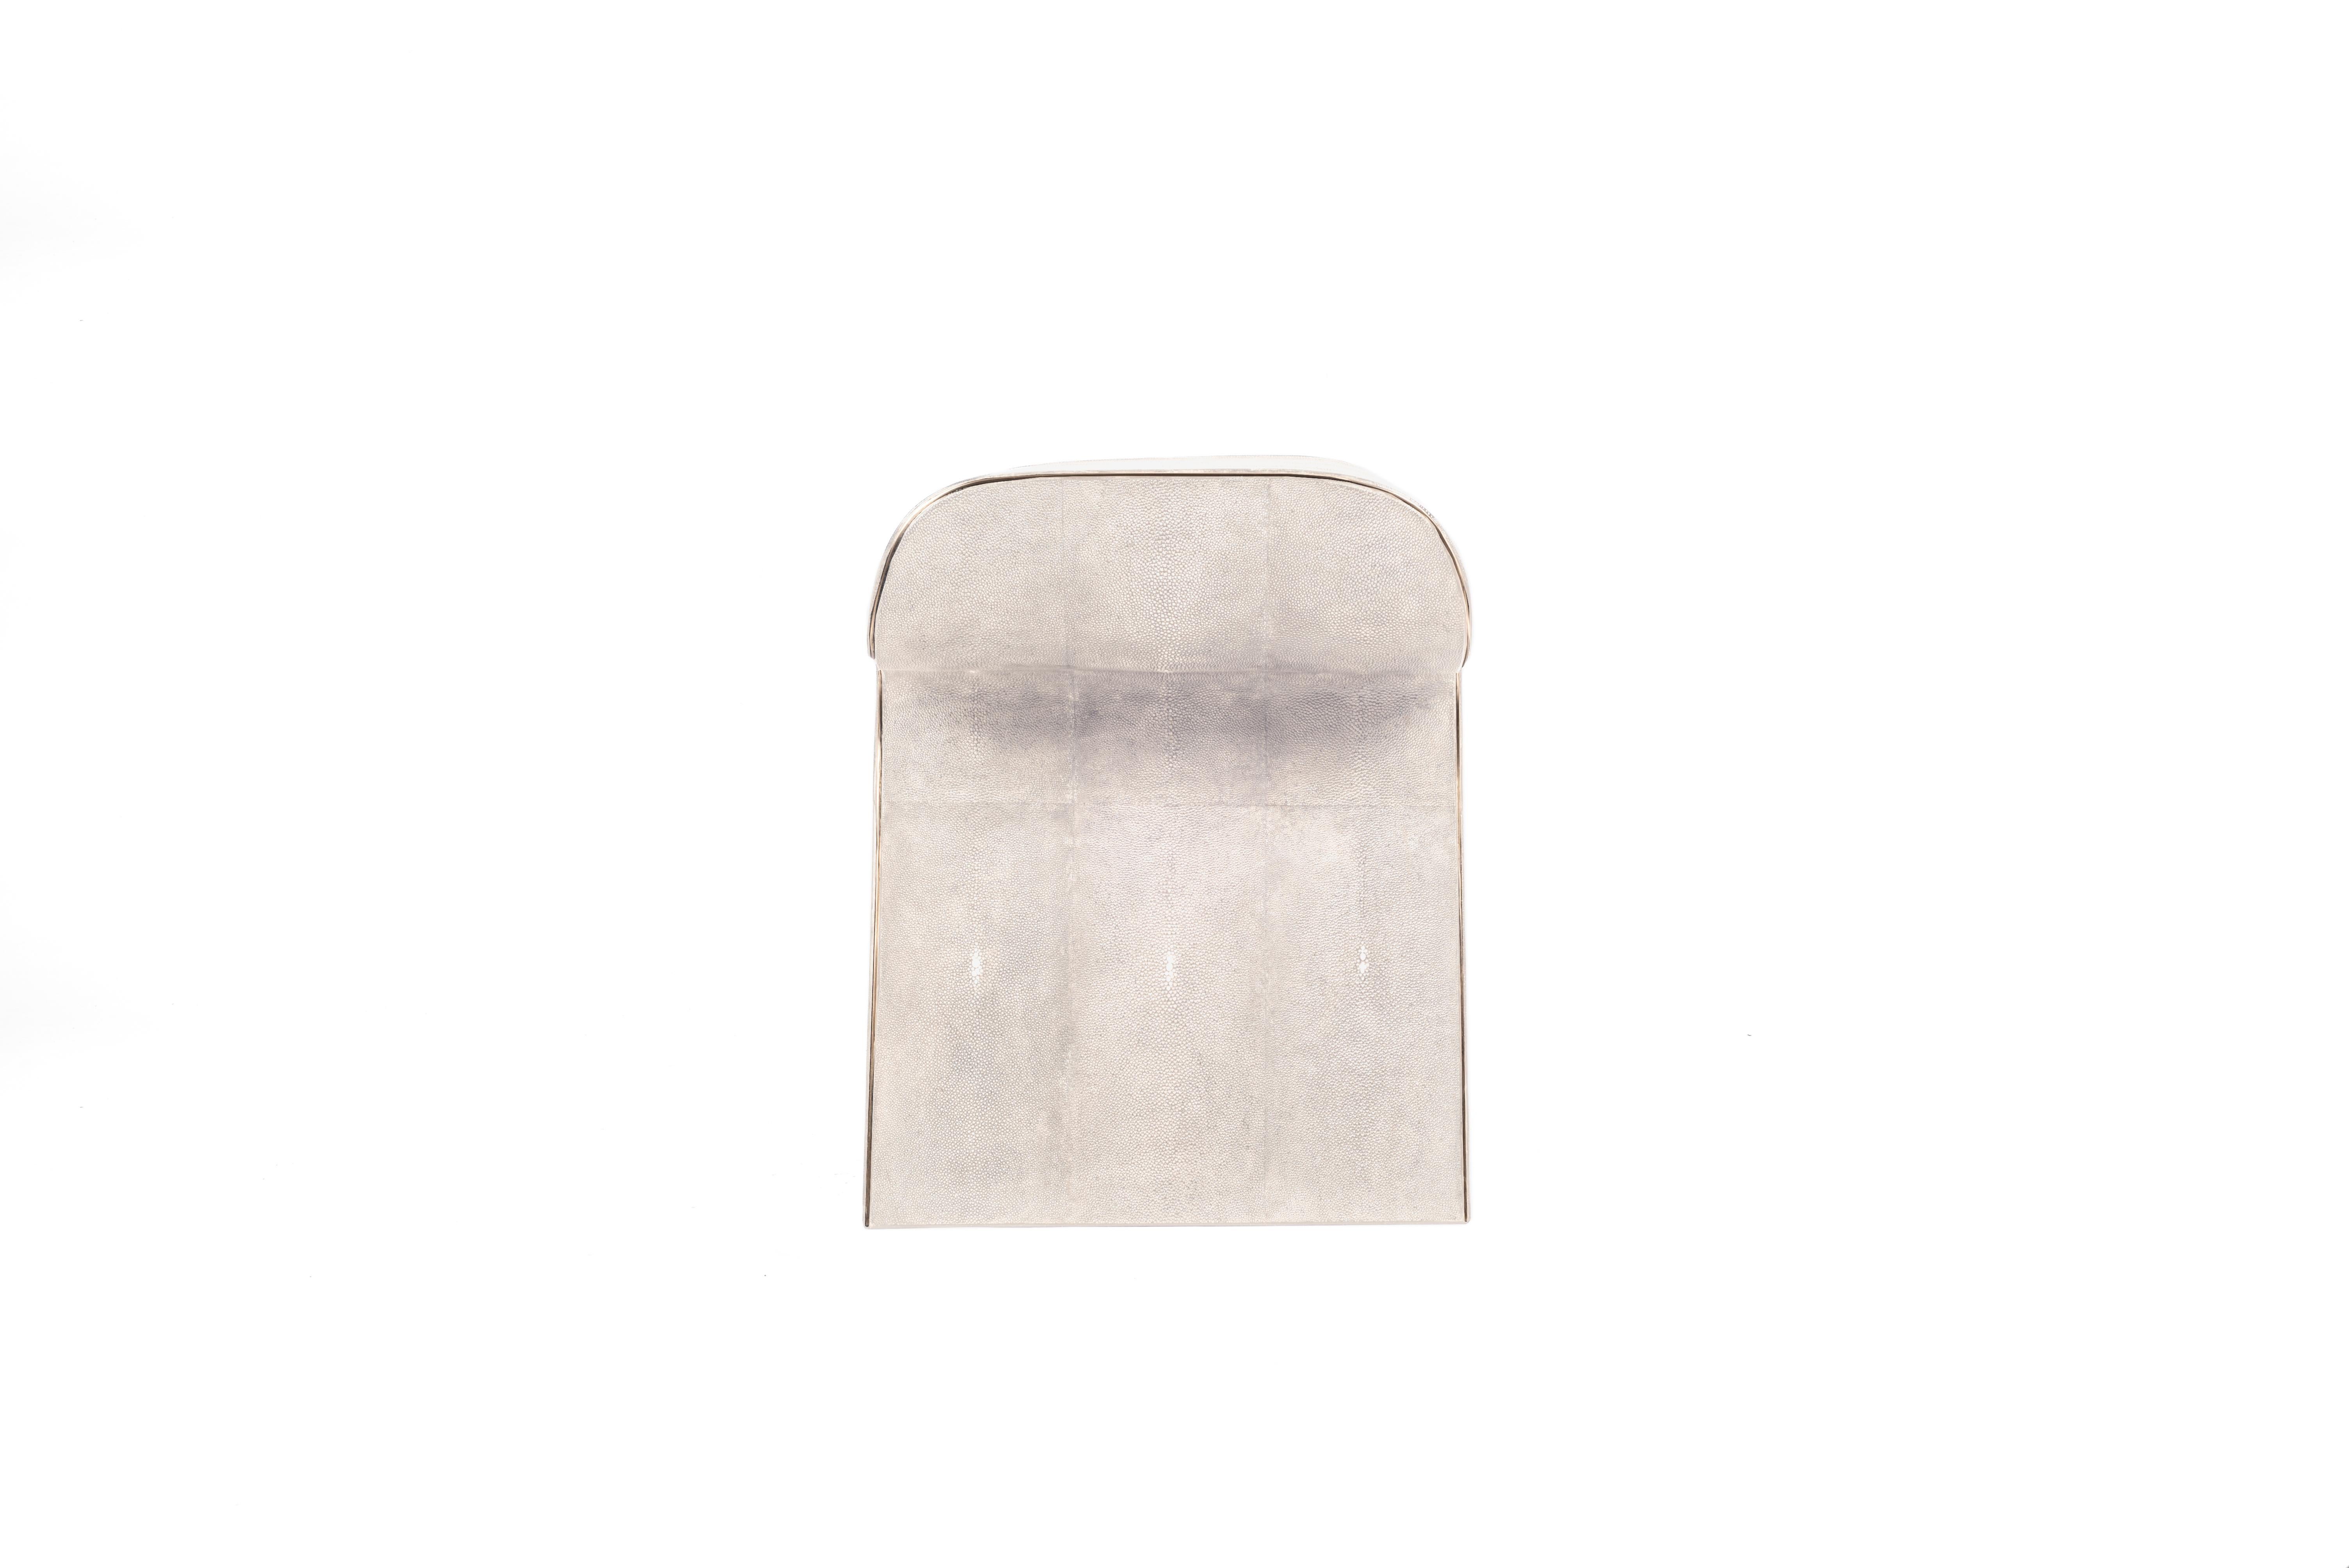 Dandy Stool Upholstered in Cream Fur & Bronze-Patina Brass Details by Kifu Paris For Sale 1